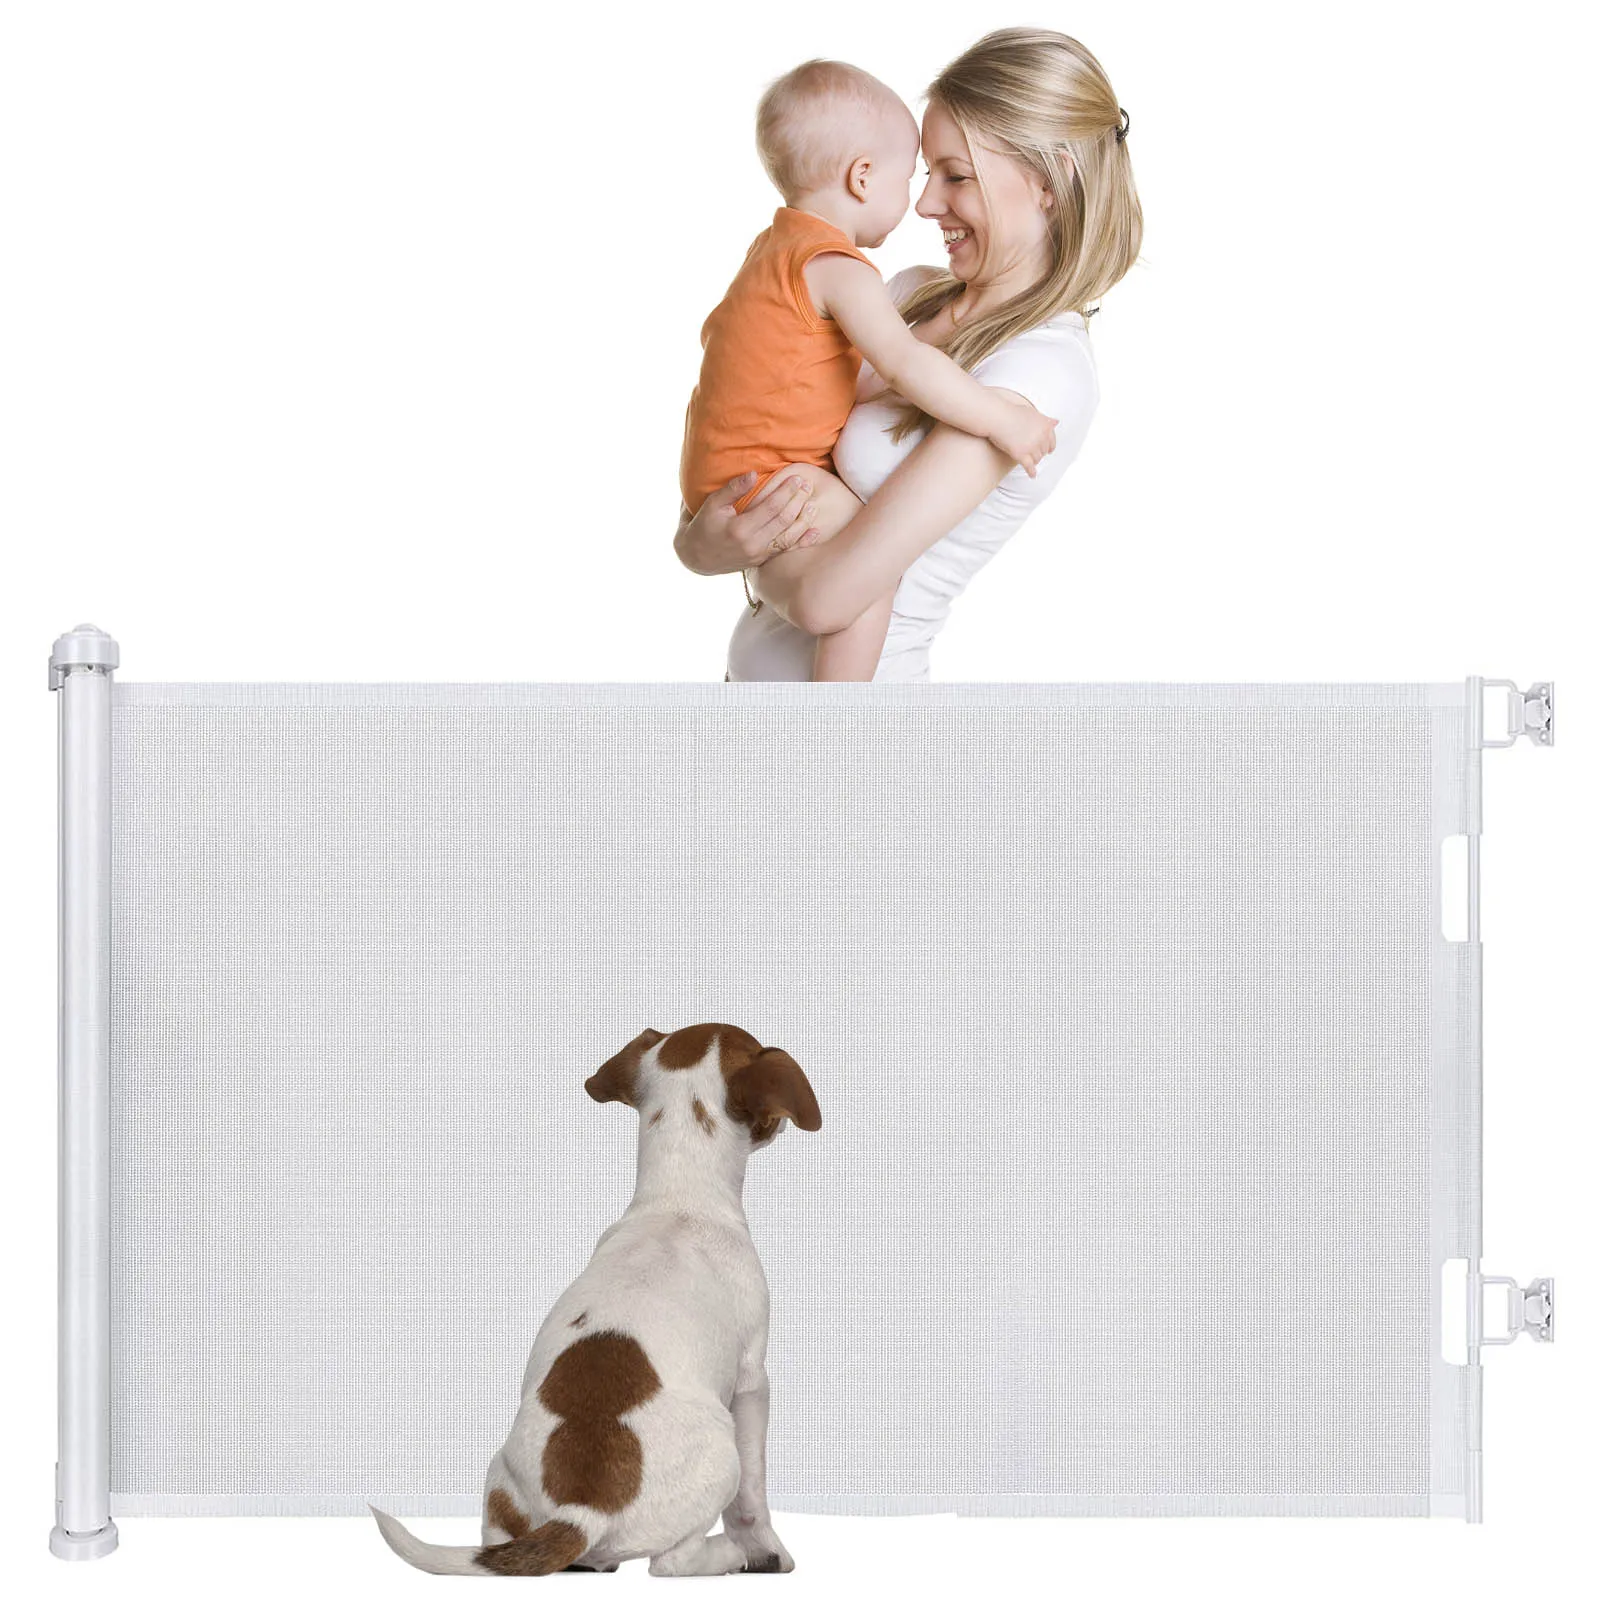 Upgraded Retractable Stair Mesh Gate for Dog and Baby 150x86 cm Safety Gates for Children & Pet with One Handed Silent Operation